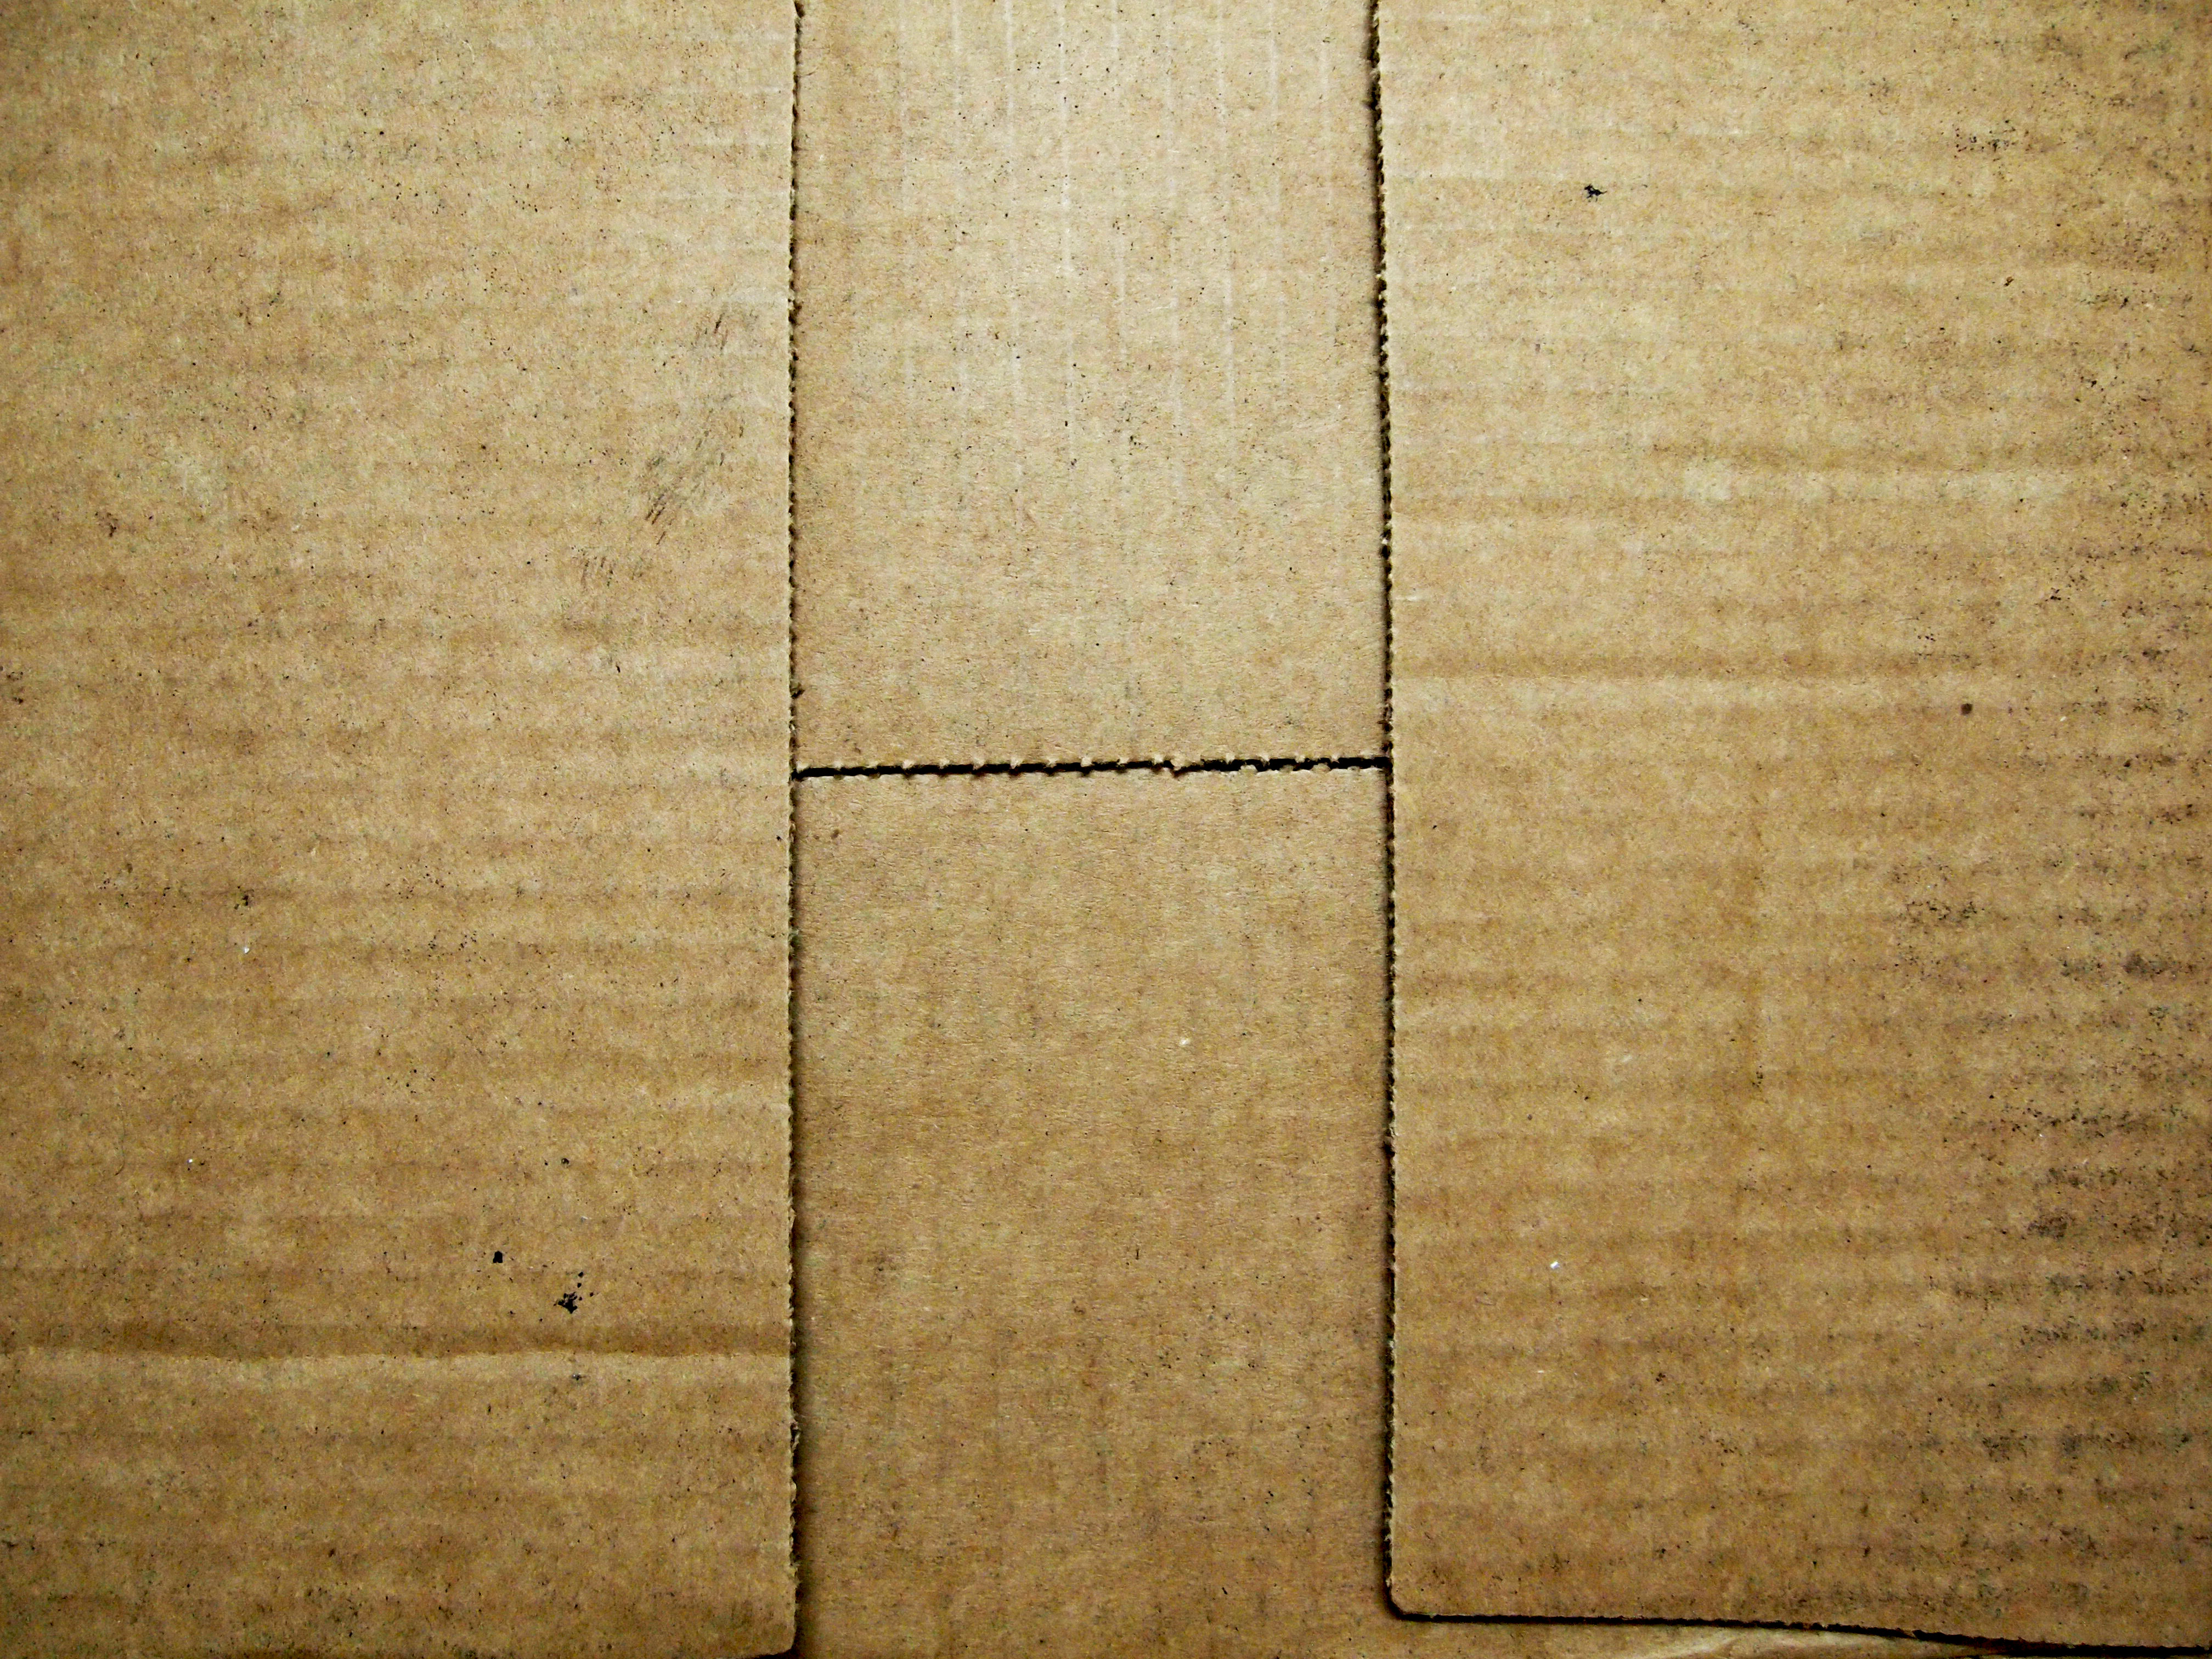 corrugated cardboard textures | 30day free texture challenge ...